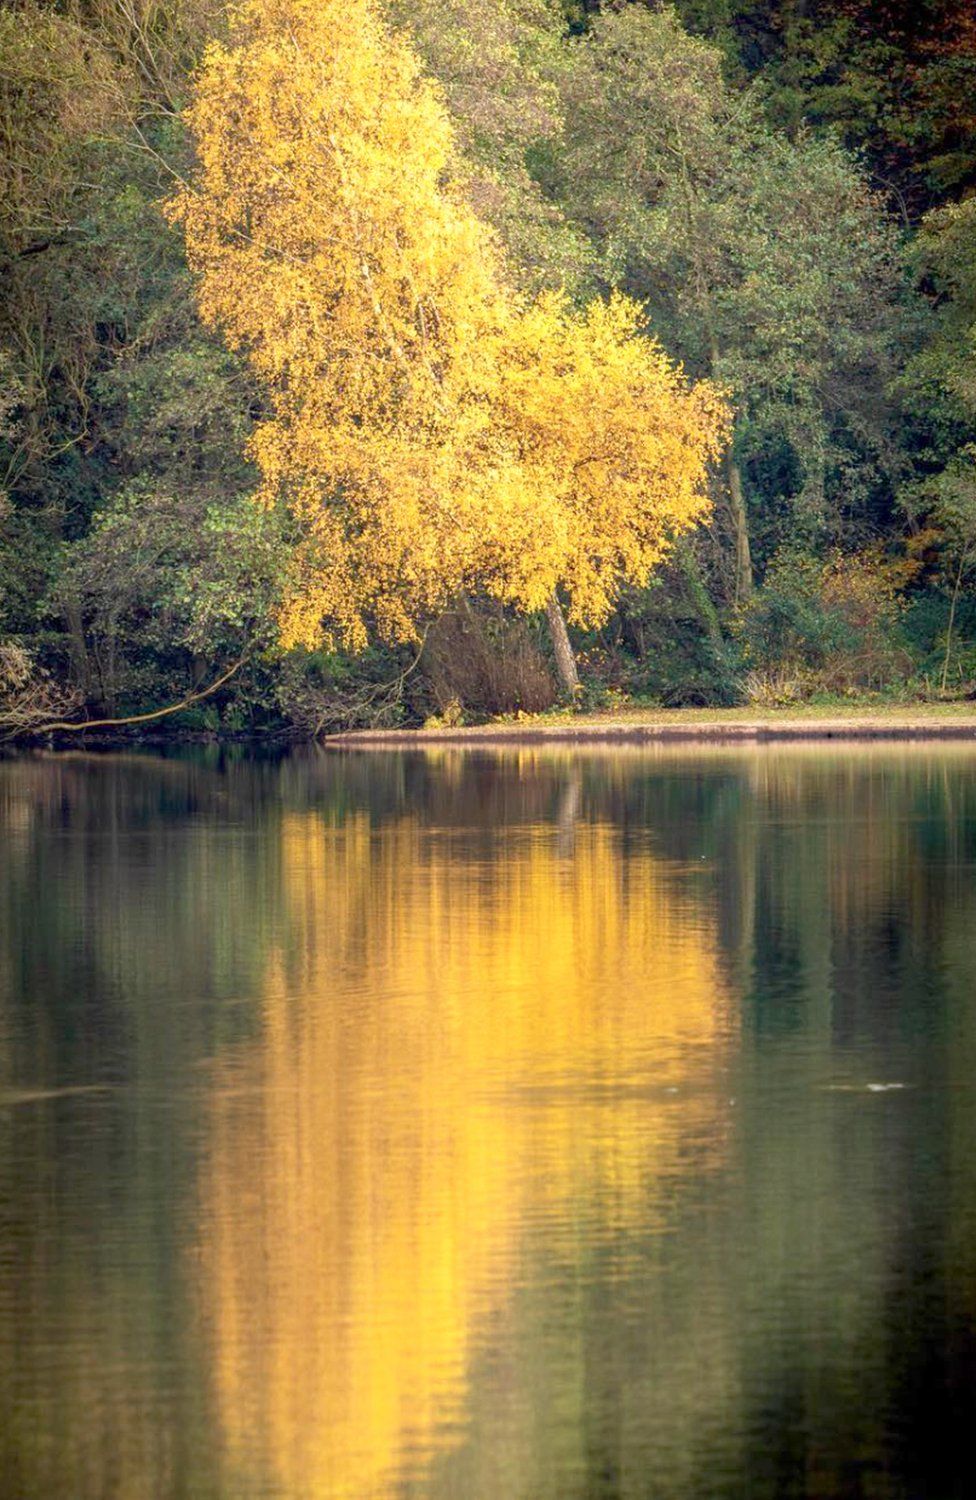 Leaves turn yellow on a tree at Sutton Park